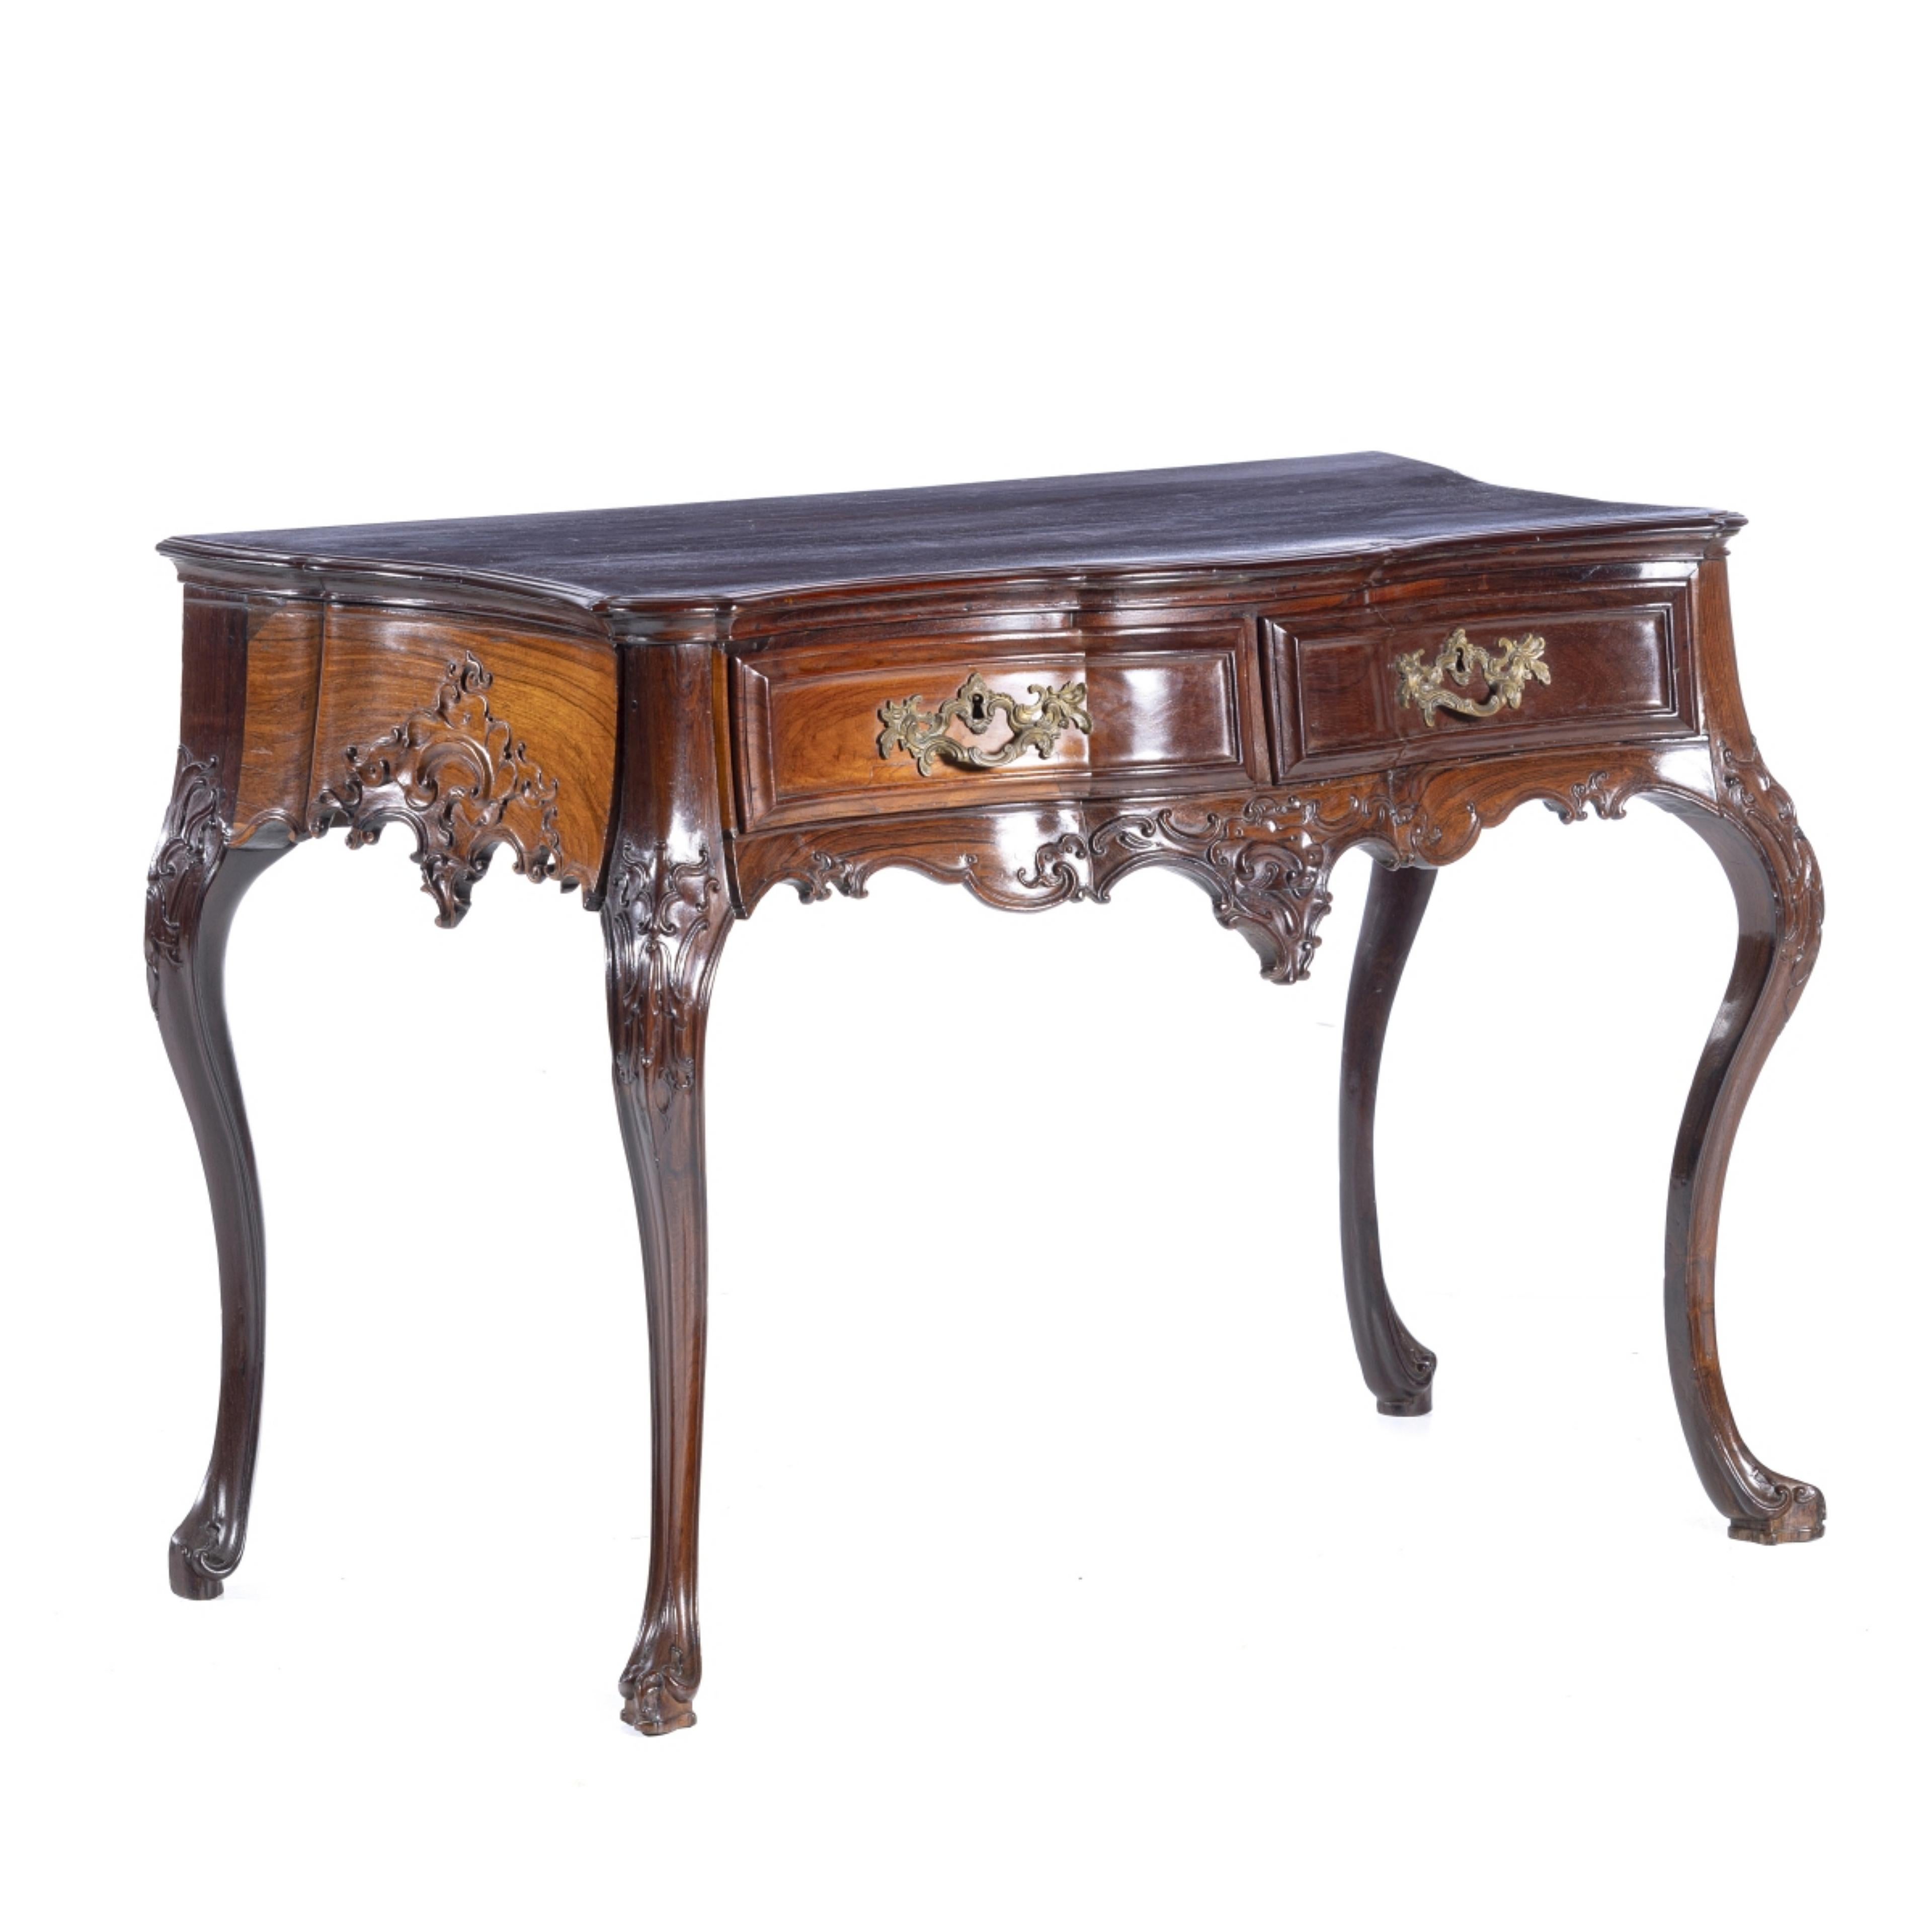 Important Portuguese Backing Table D. José 18th Century Rosewood In Good Condition For Sale In Madrid, ES